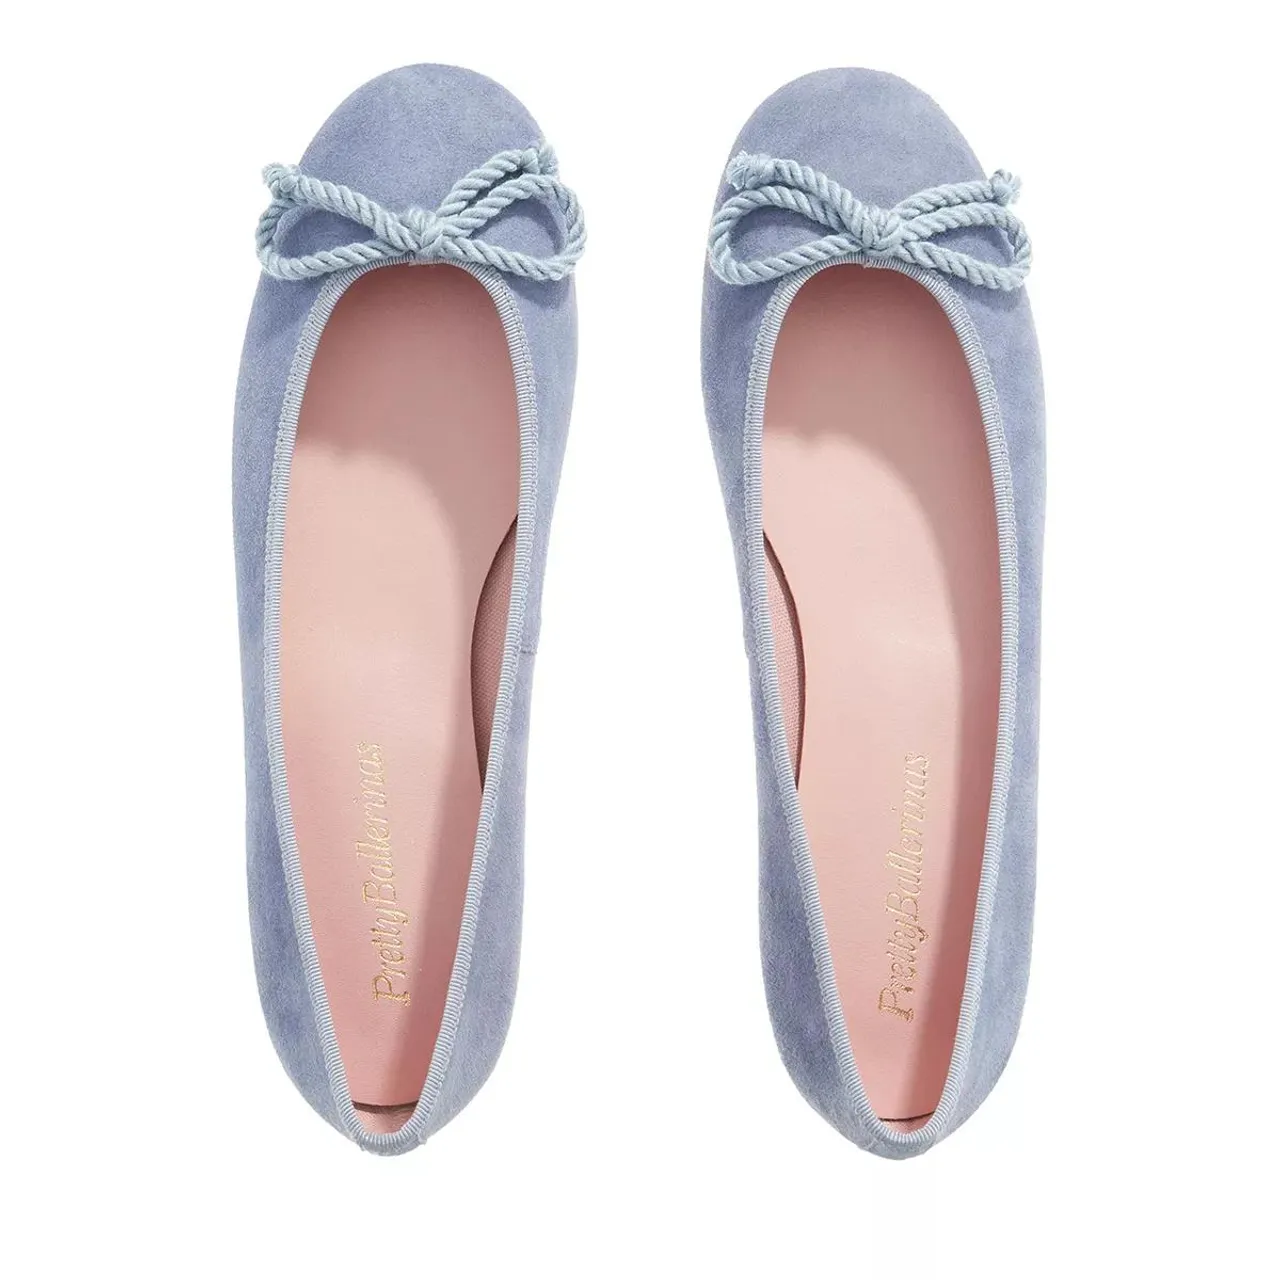 Pretty Ballerinas Loafers & Ballet Pumps - 35663 - blue - Loafers & Ballet Pumps for ladies